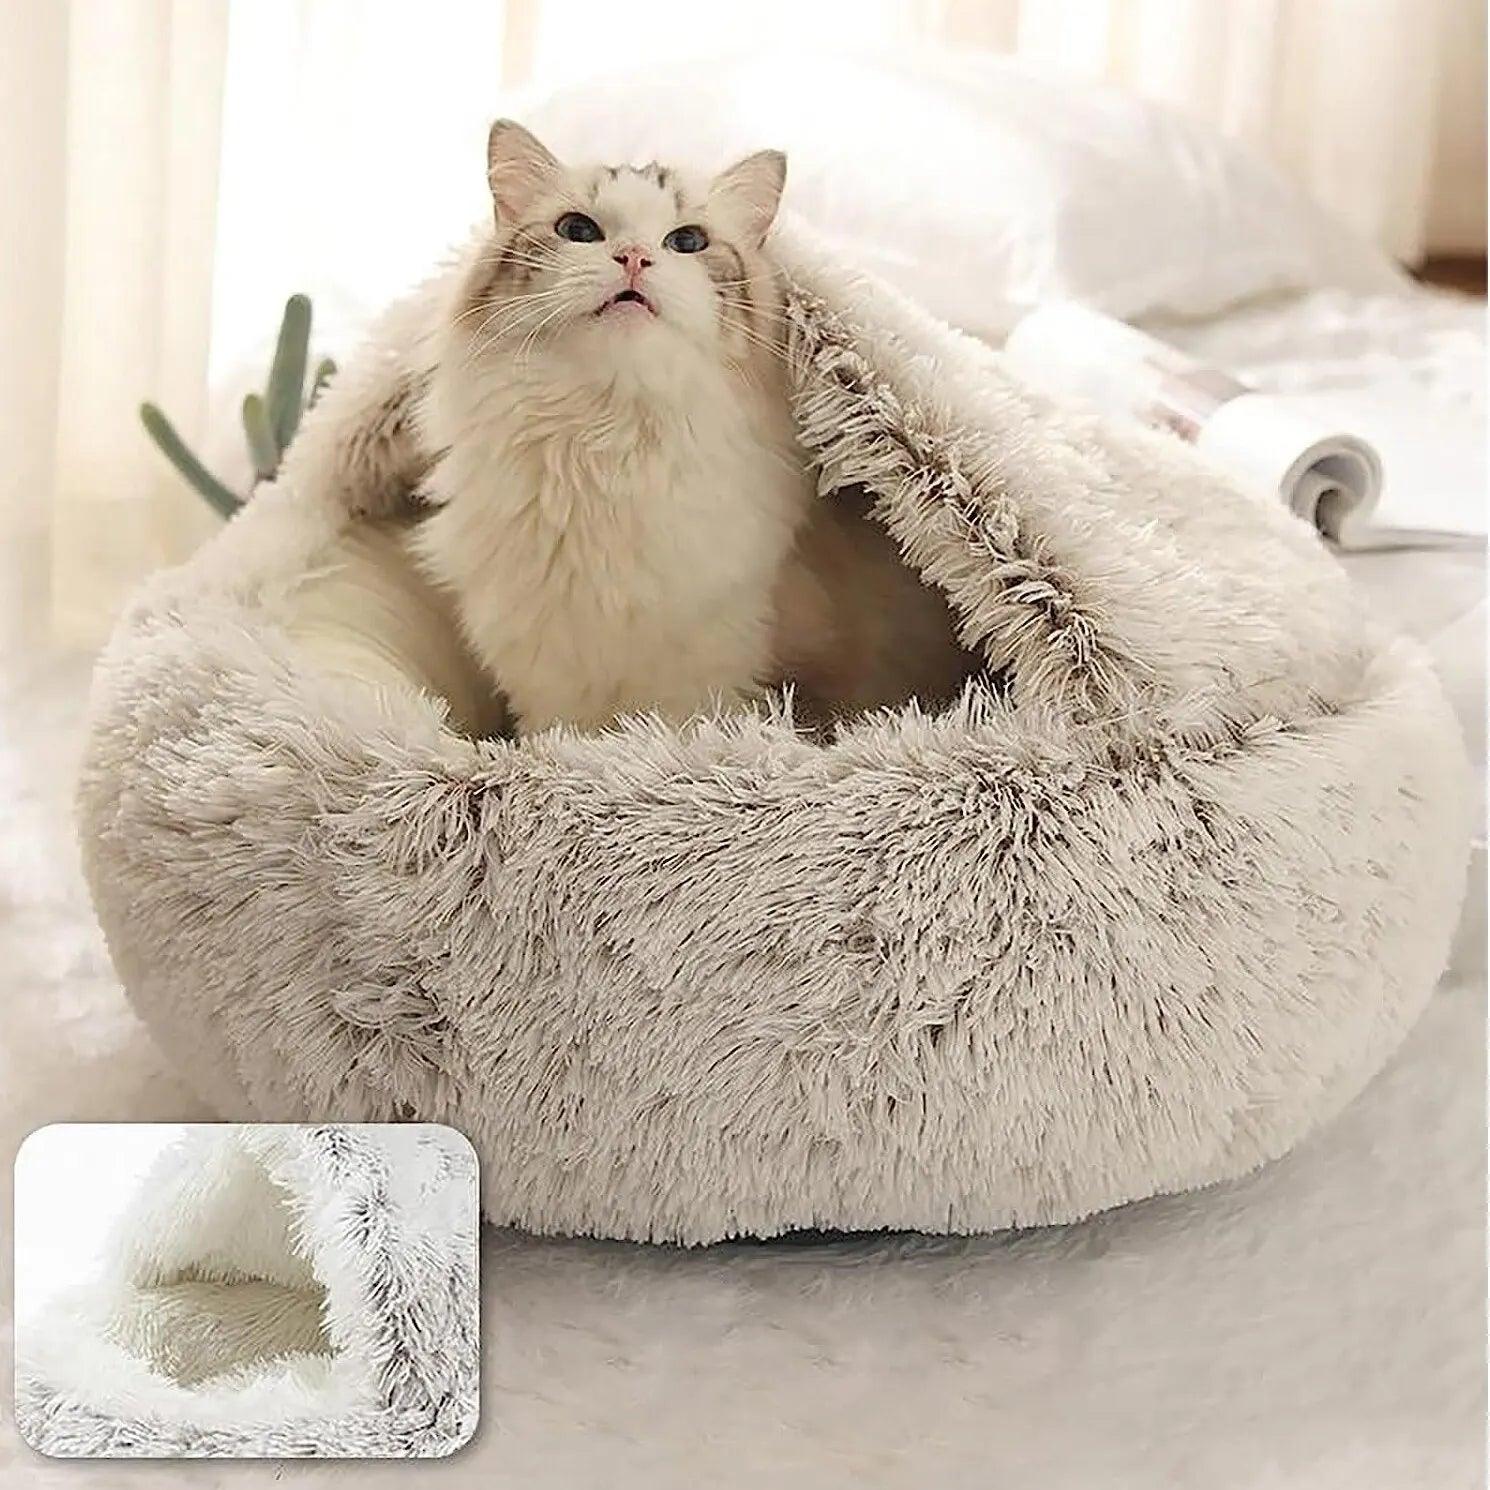 Soft Plush Pet Bed with Cover Round Cat Bed Pet Mattress Warm Cat Dog 2 in 1 Sleeping Nest Cave for Small Dogs - Ammpoure Wellbeing